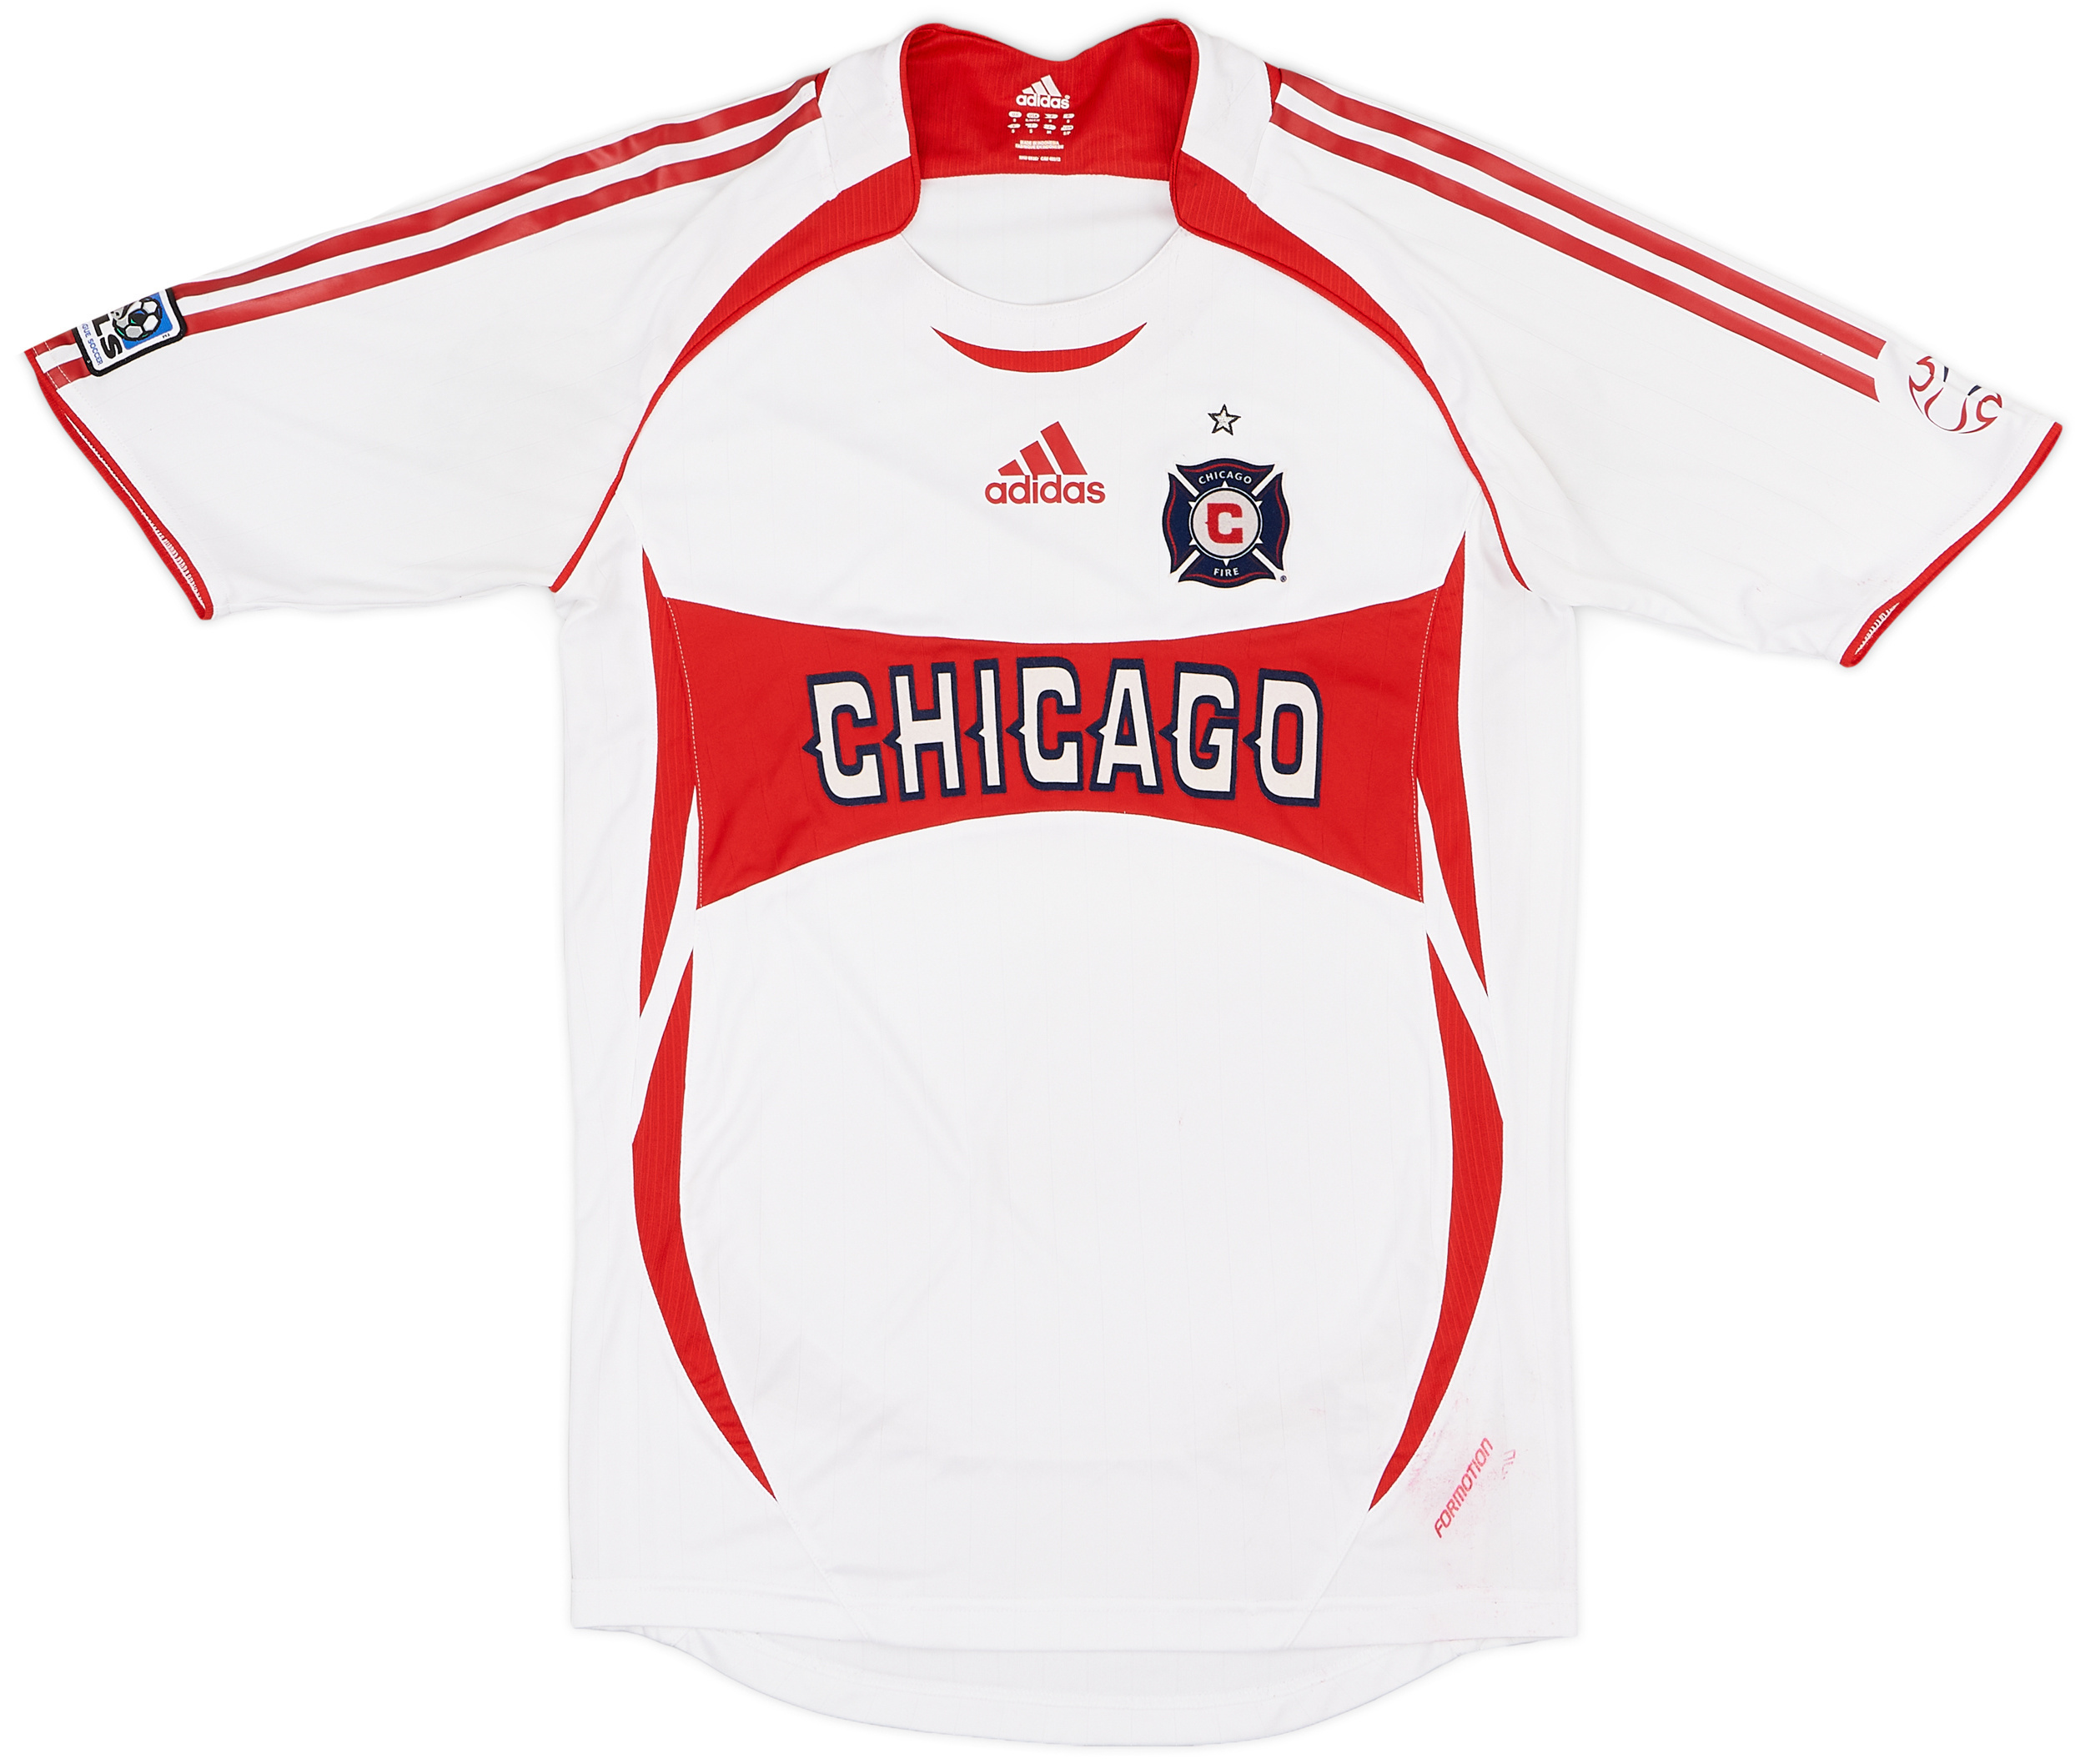 2006-08 Chicago Fire Authentic Home Shirt - 6/10 - ()